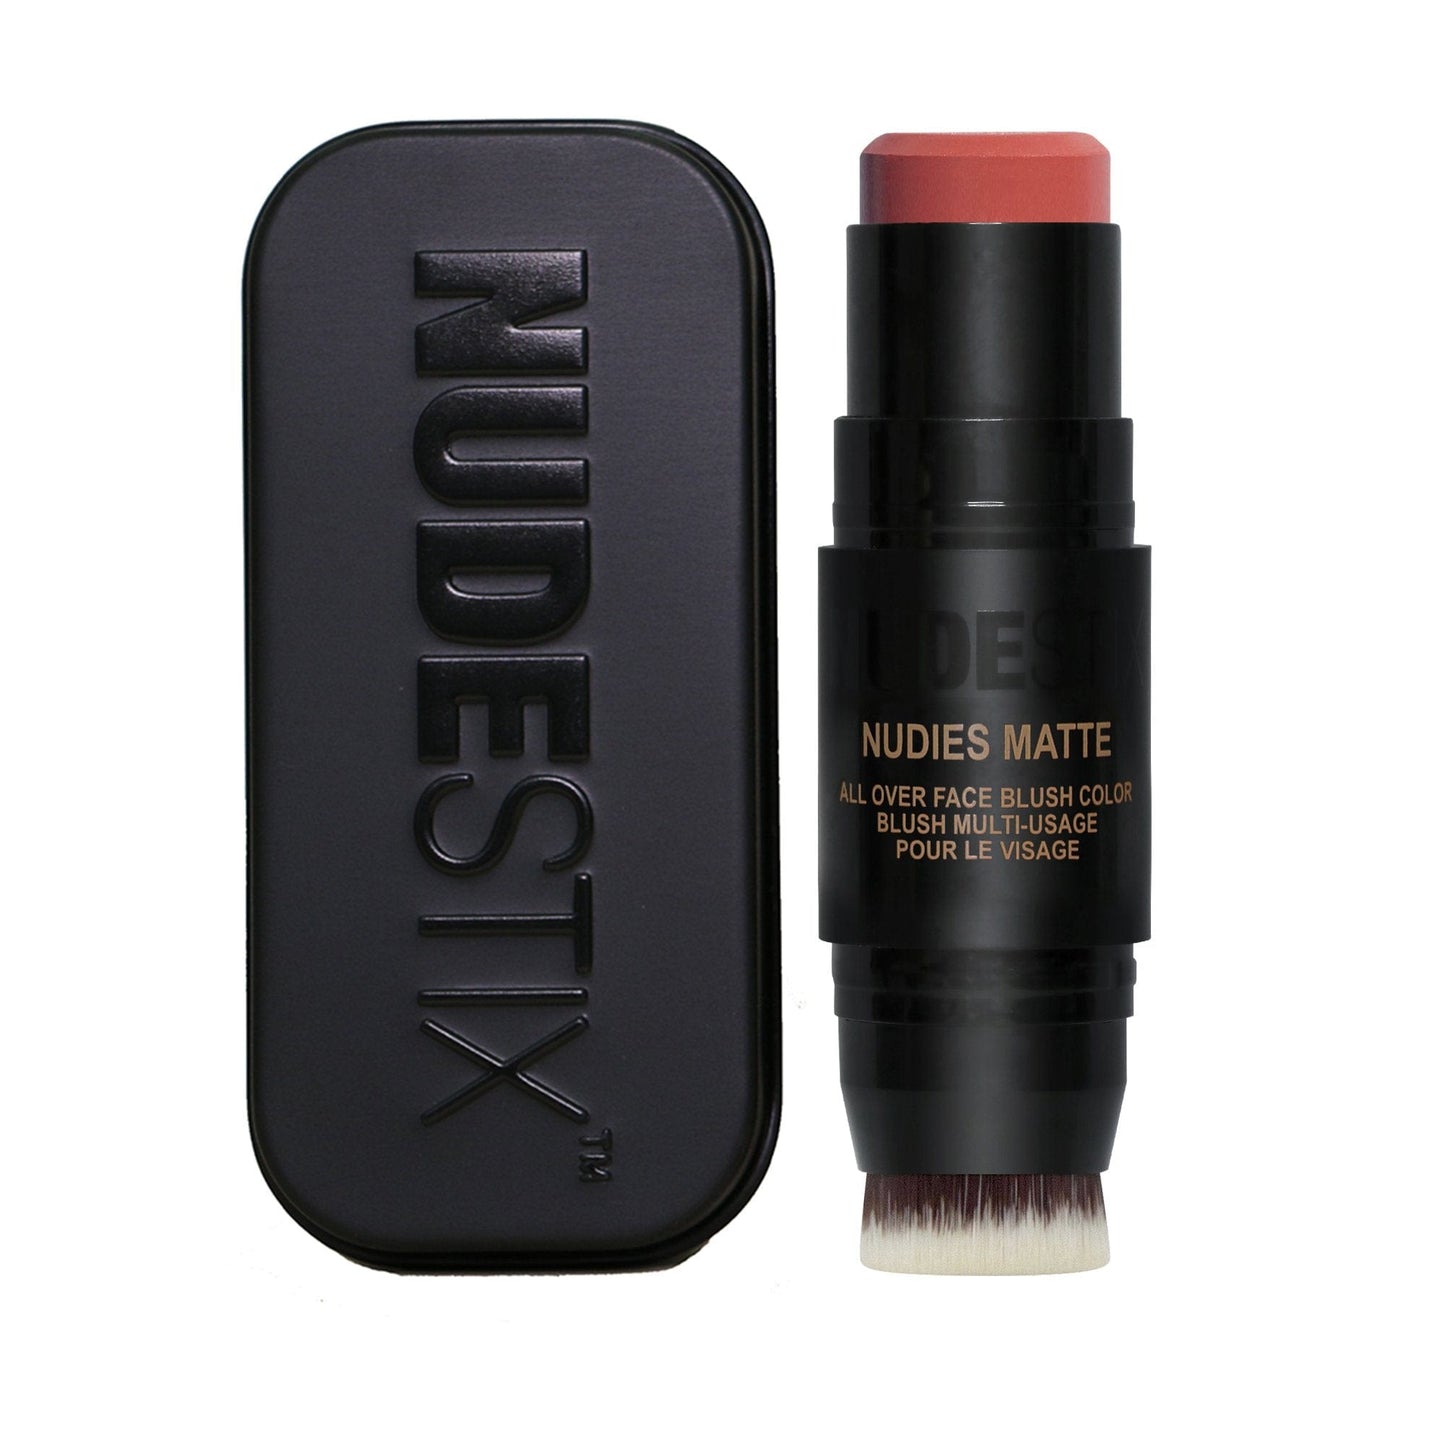 Nudies Blush Stick in shade Body Language with Nudestix Can